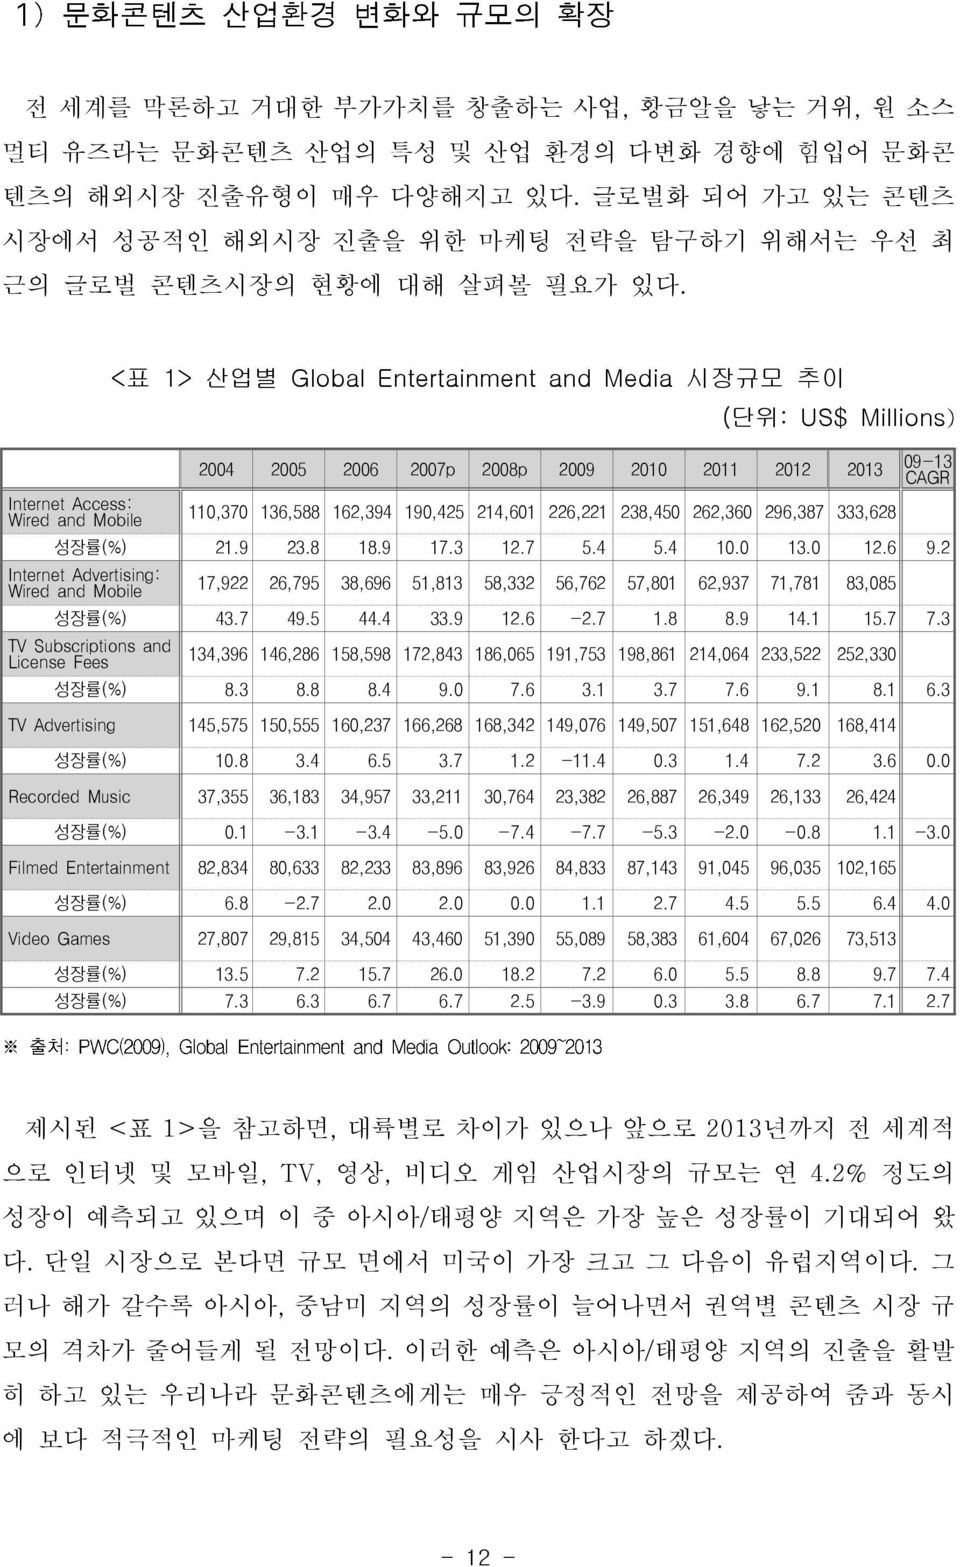 Internet Access: Wired and Mobile < 표 1> 산업별 Global Entertainment and Media 시장규모 추이 ( 단위: US$ Millions) 2004 2005 2006 2007p 2008p 2009 2010 2011 2012 2013 110,370 136,588 162,394 190,425 214,601